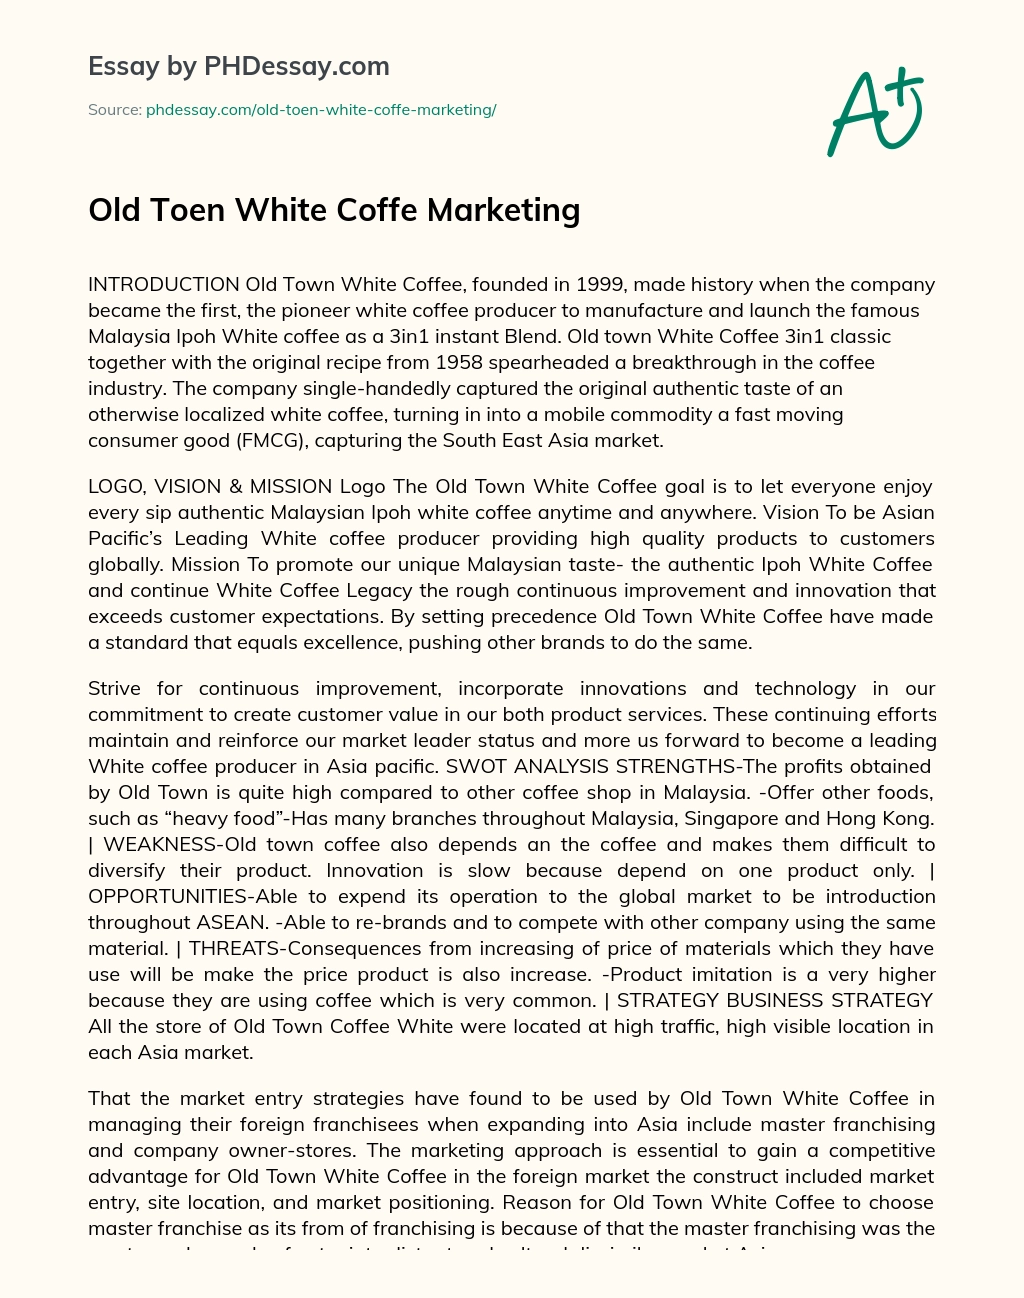 Old Town White Coffe Marketing essay